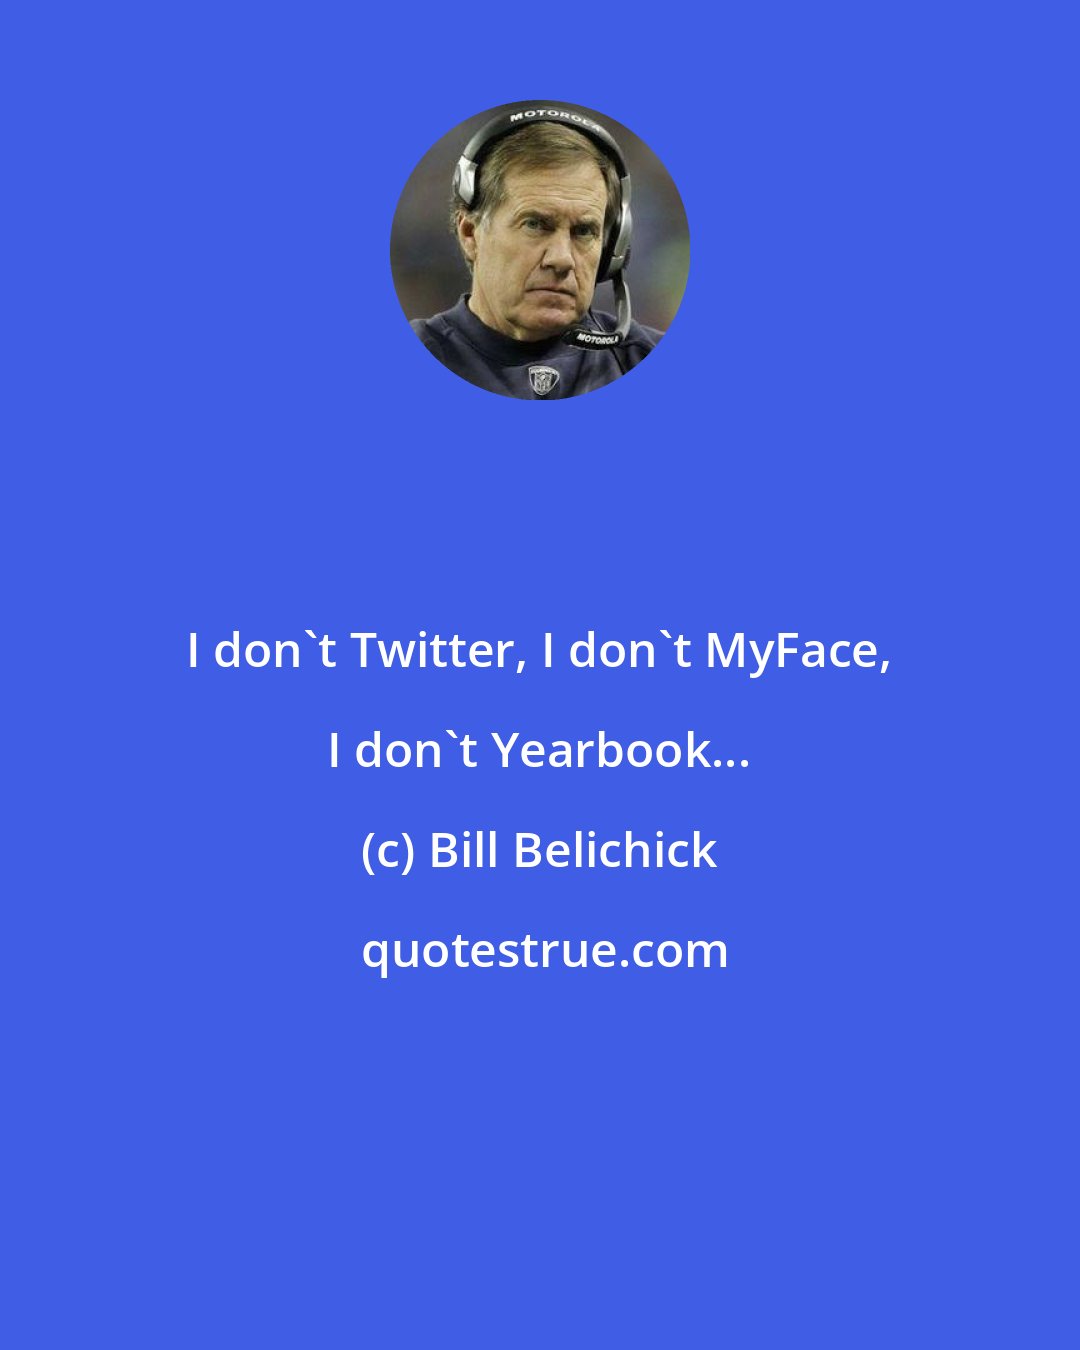 Bill Belichick: I don't Twitter, I don't MyFace, I don't Yearbook...